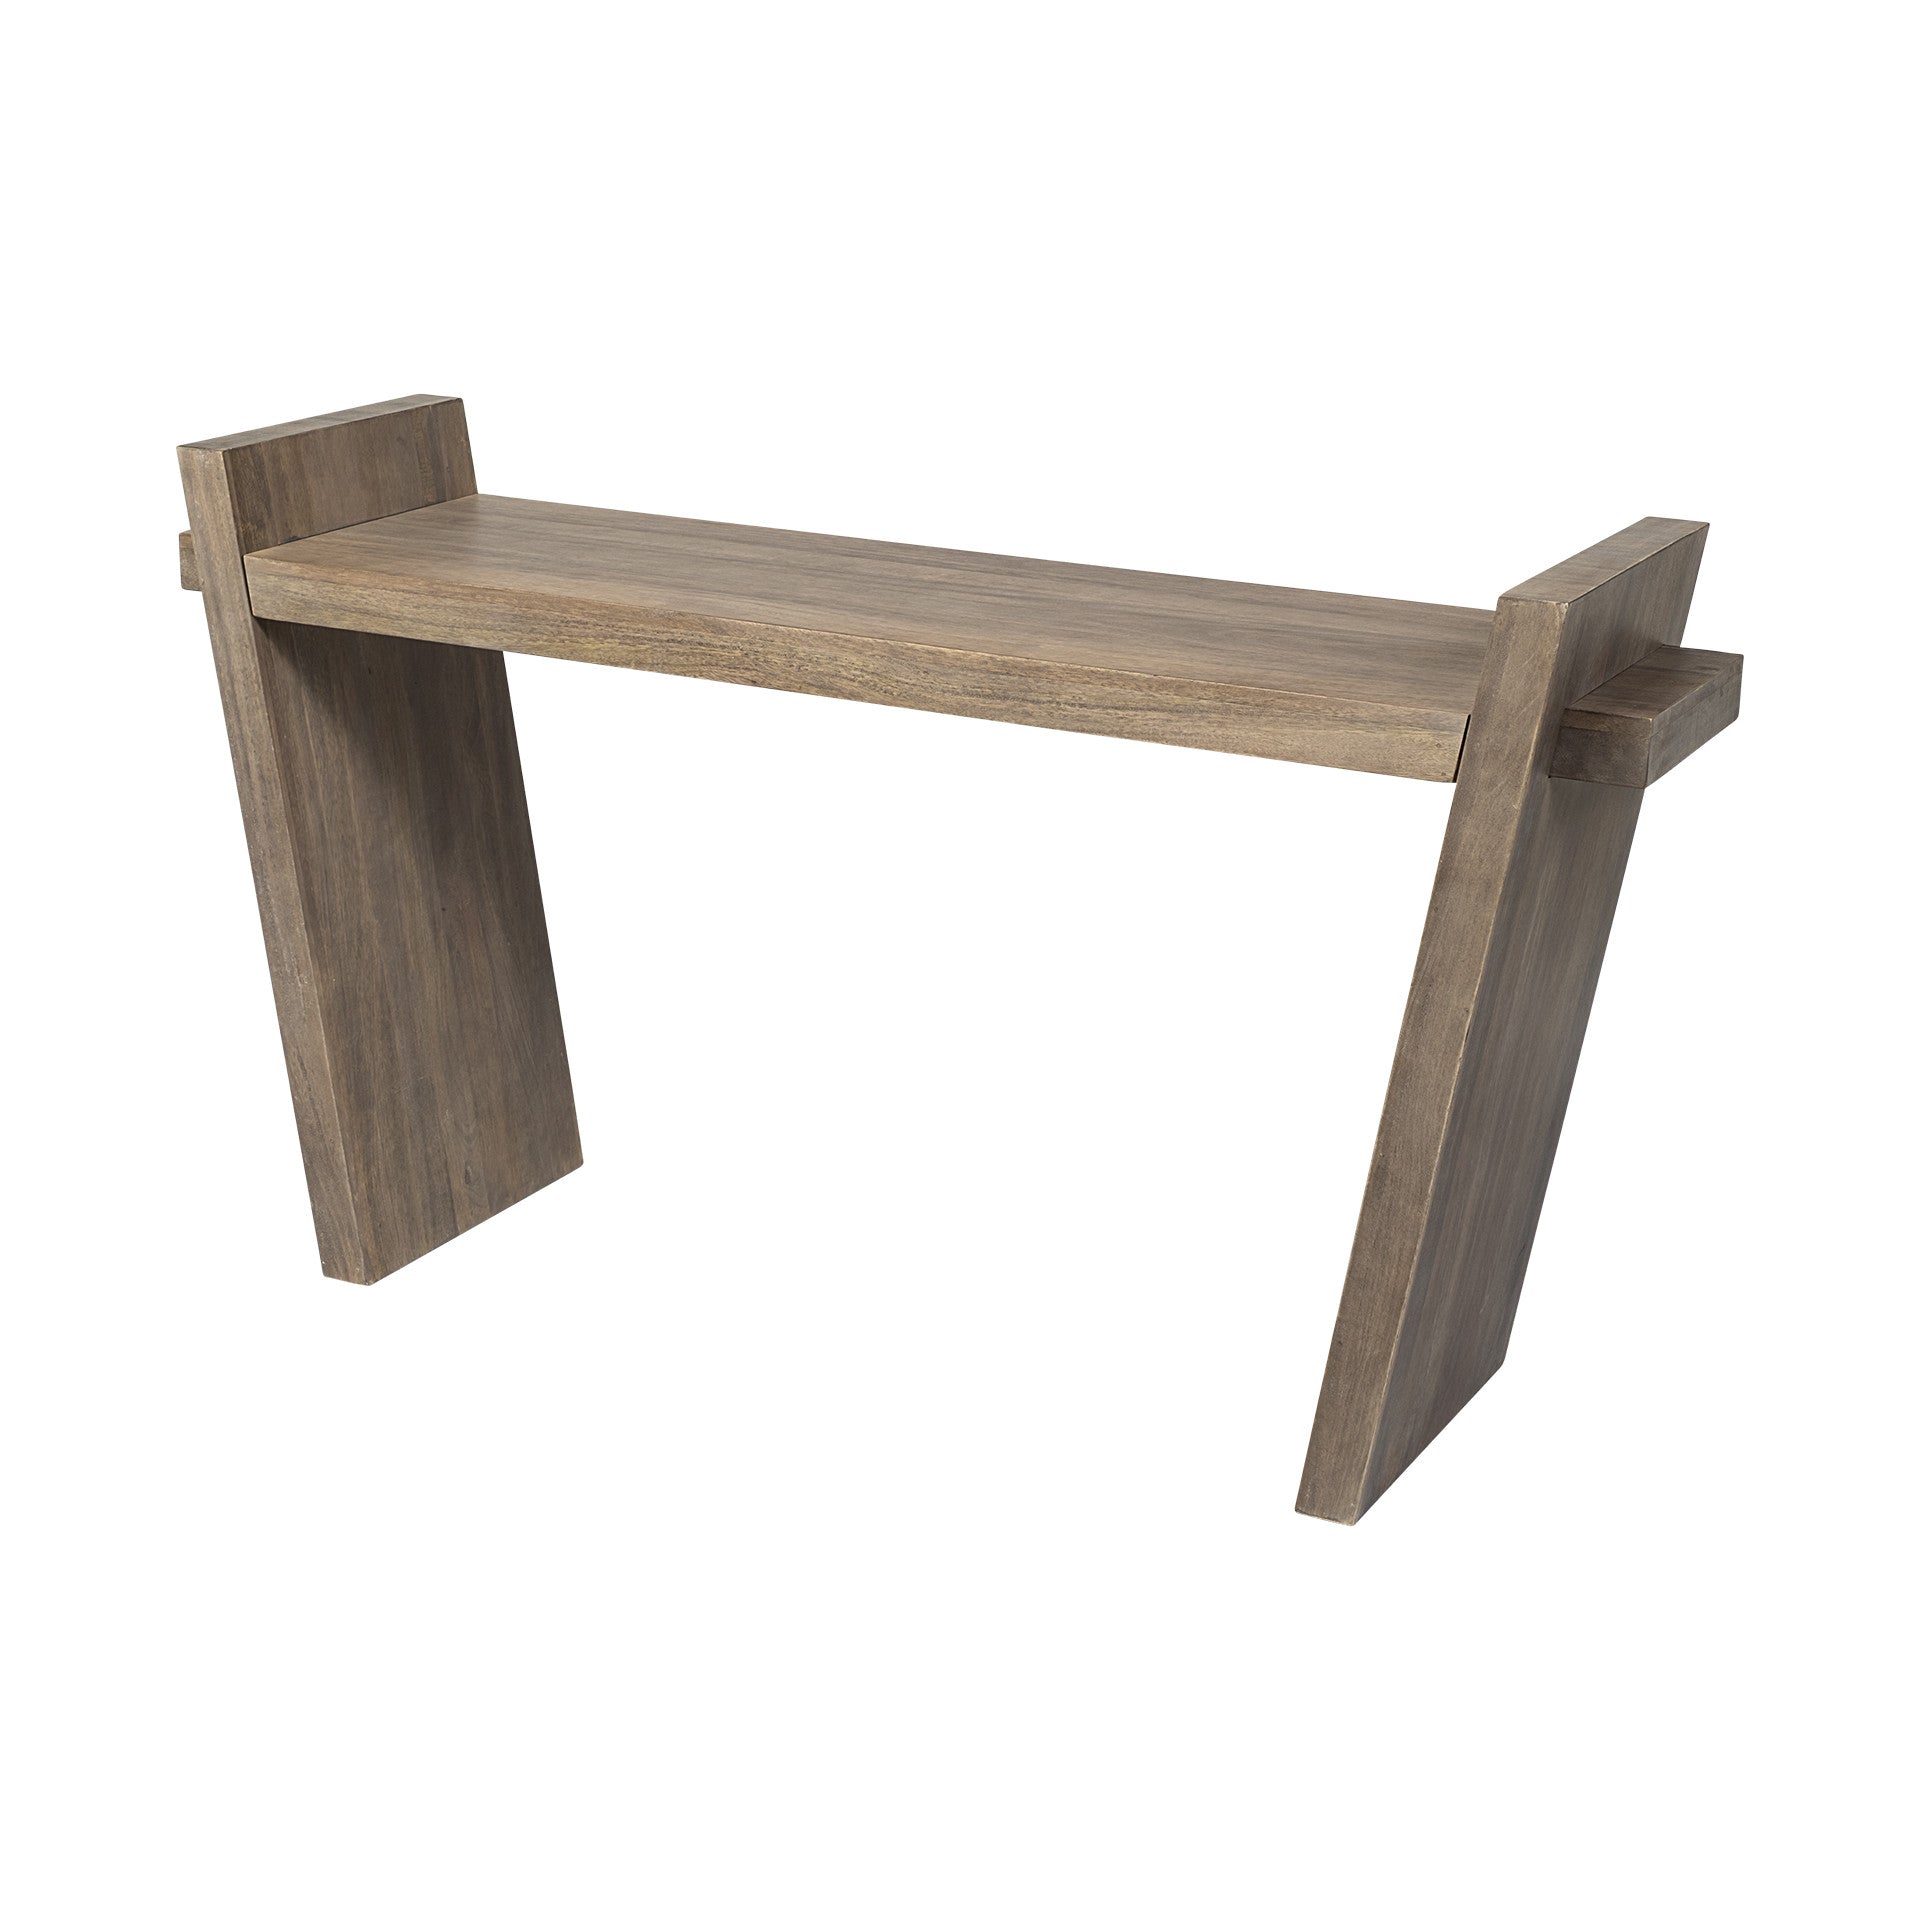 Medium Brown Solid Mango Wood Finish Console Table With Slanted Base Design